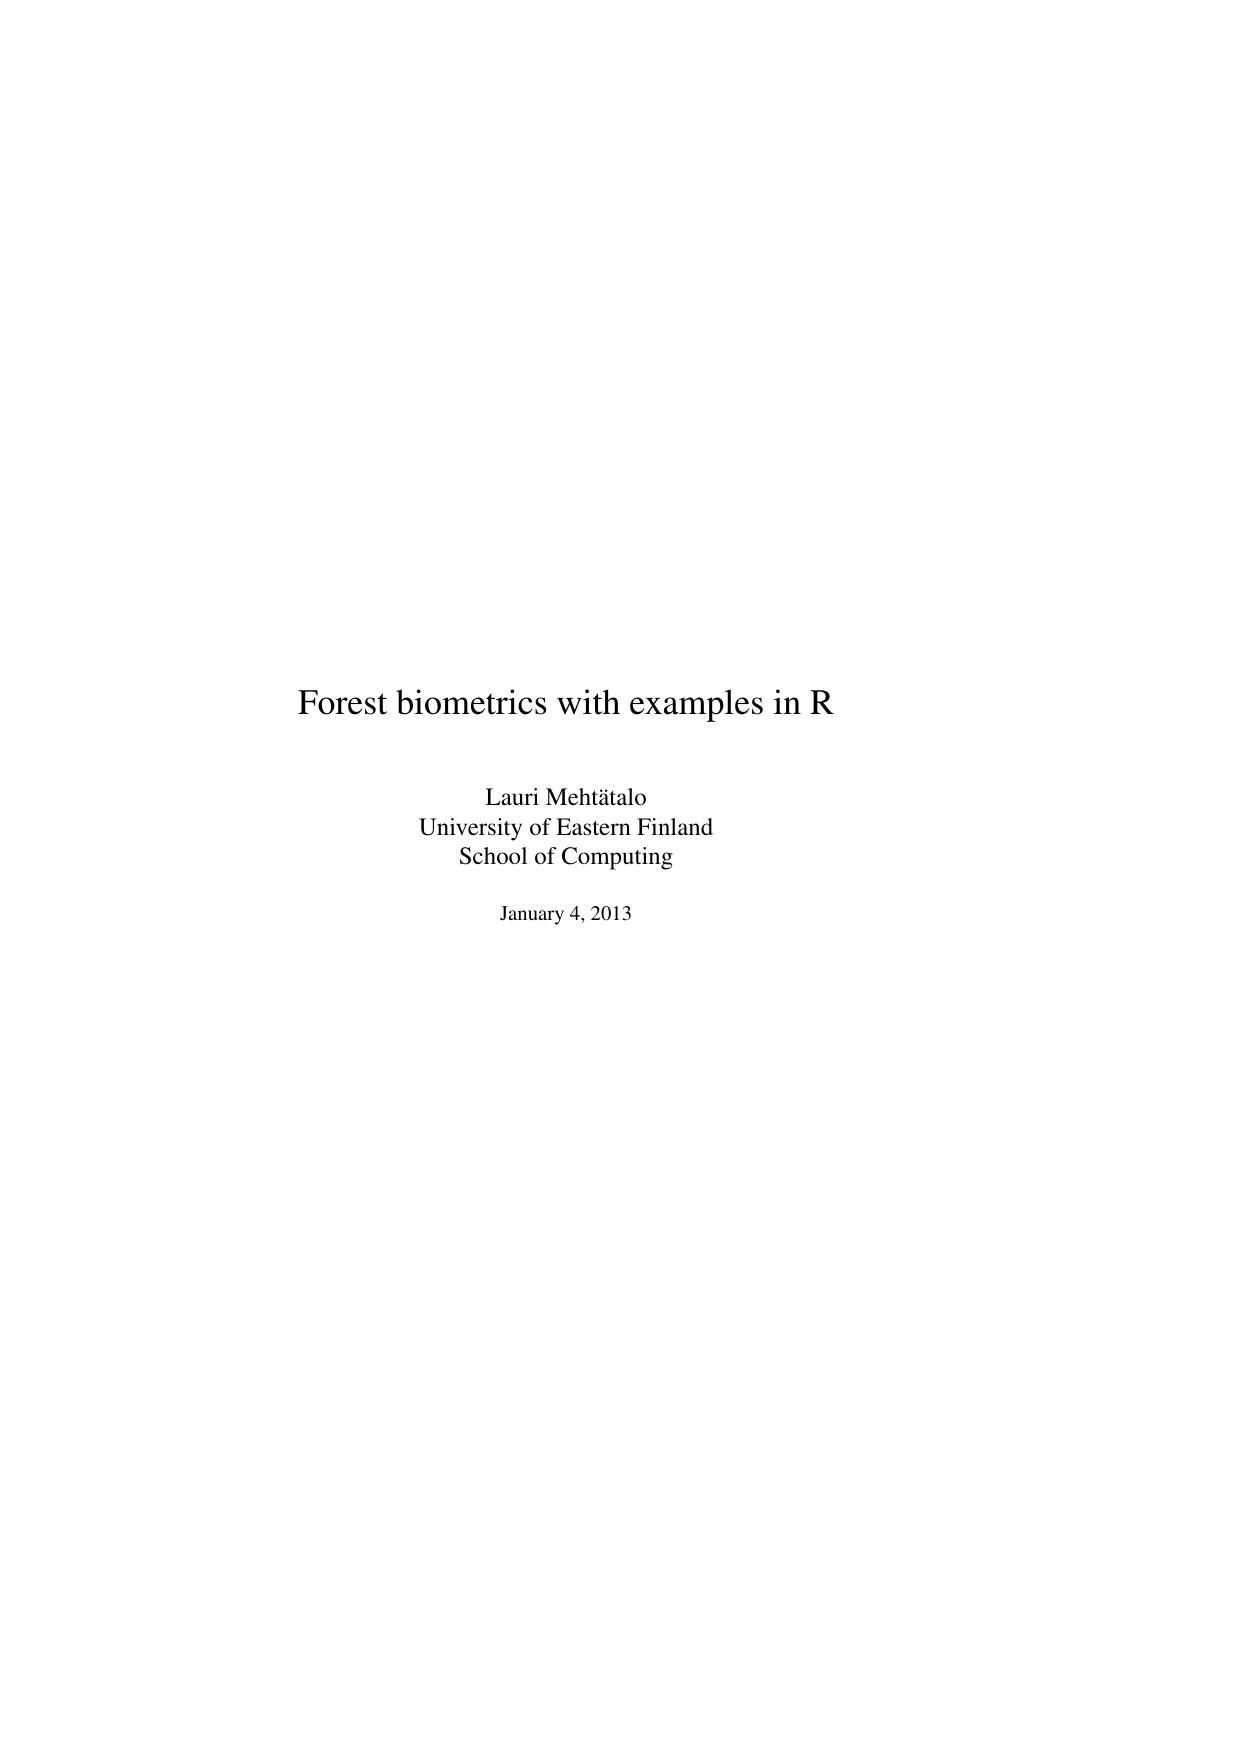 Forest biometrics with examples in R 2013